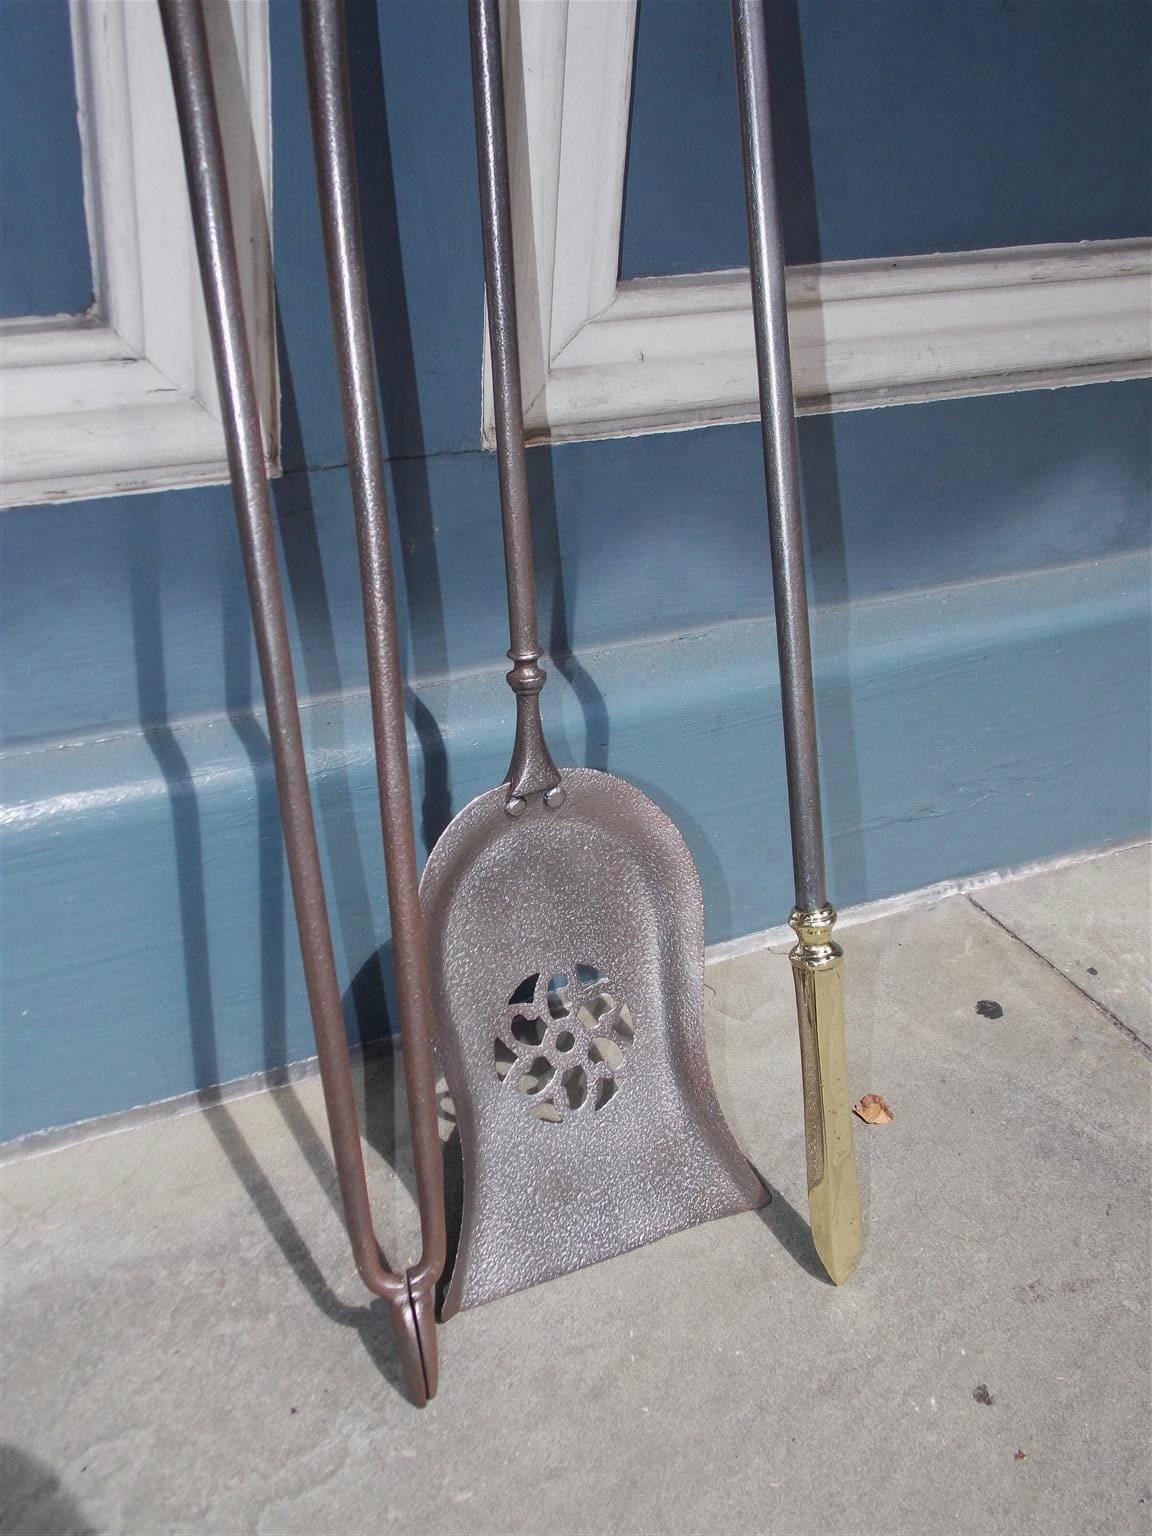 Cast Set of Three English Polished Steel and Brass Fire Place Tools, Circa 1800 For Sale